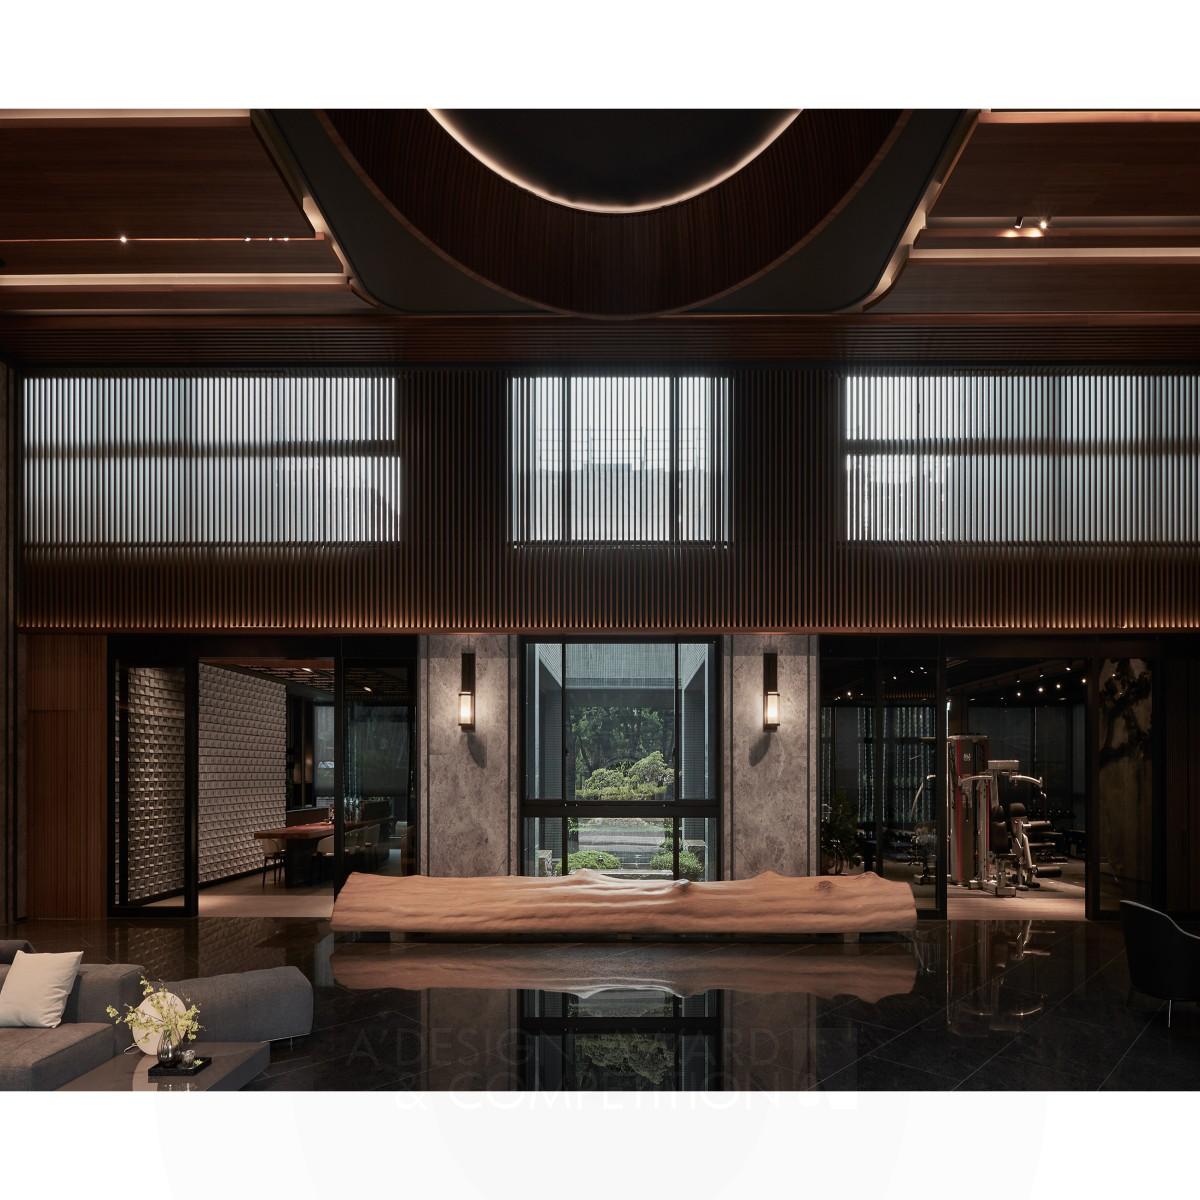 Te-Yu Liu and Hui-Ching Chang wins Silver at the prestigious A' Interior Space, Retail and Exhibition Design Award with Secluded Beauty in the Mountains Residence.